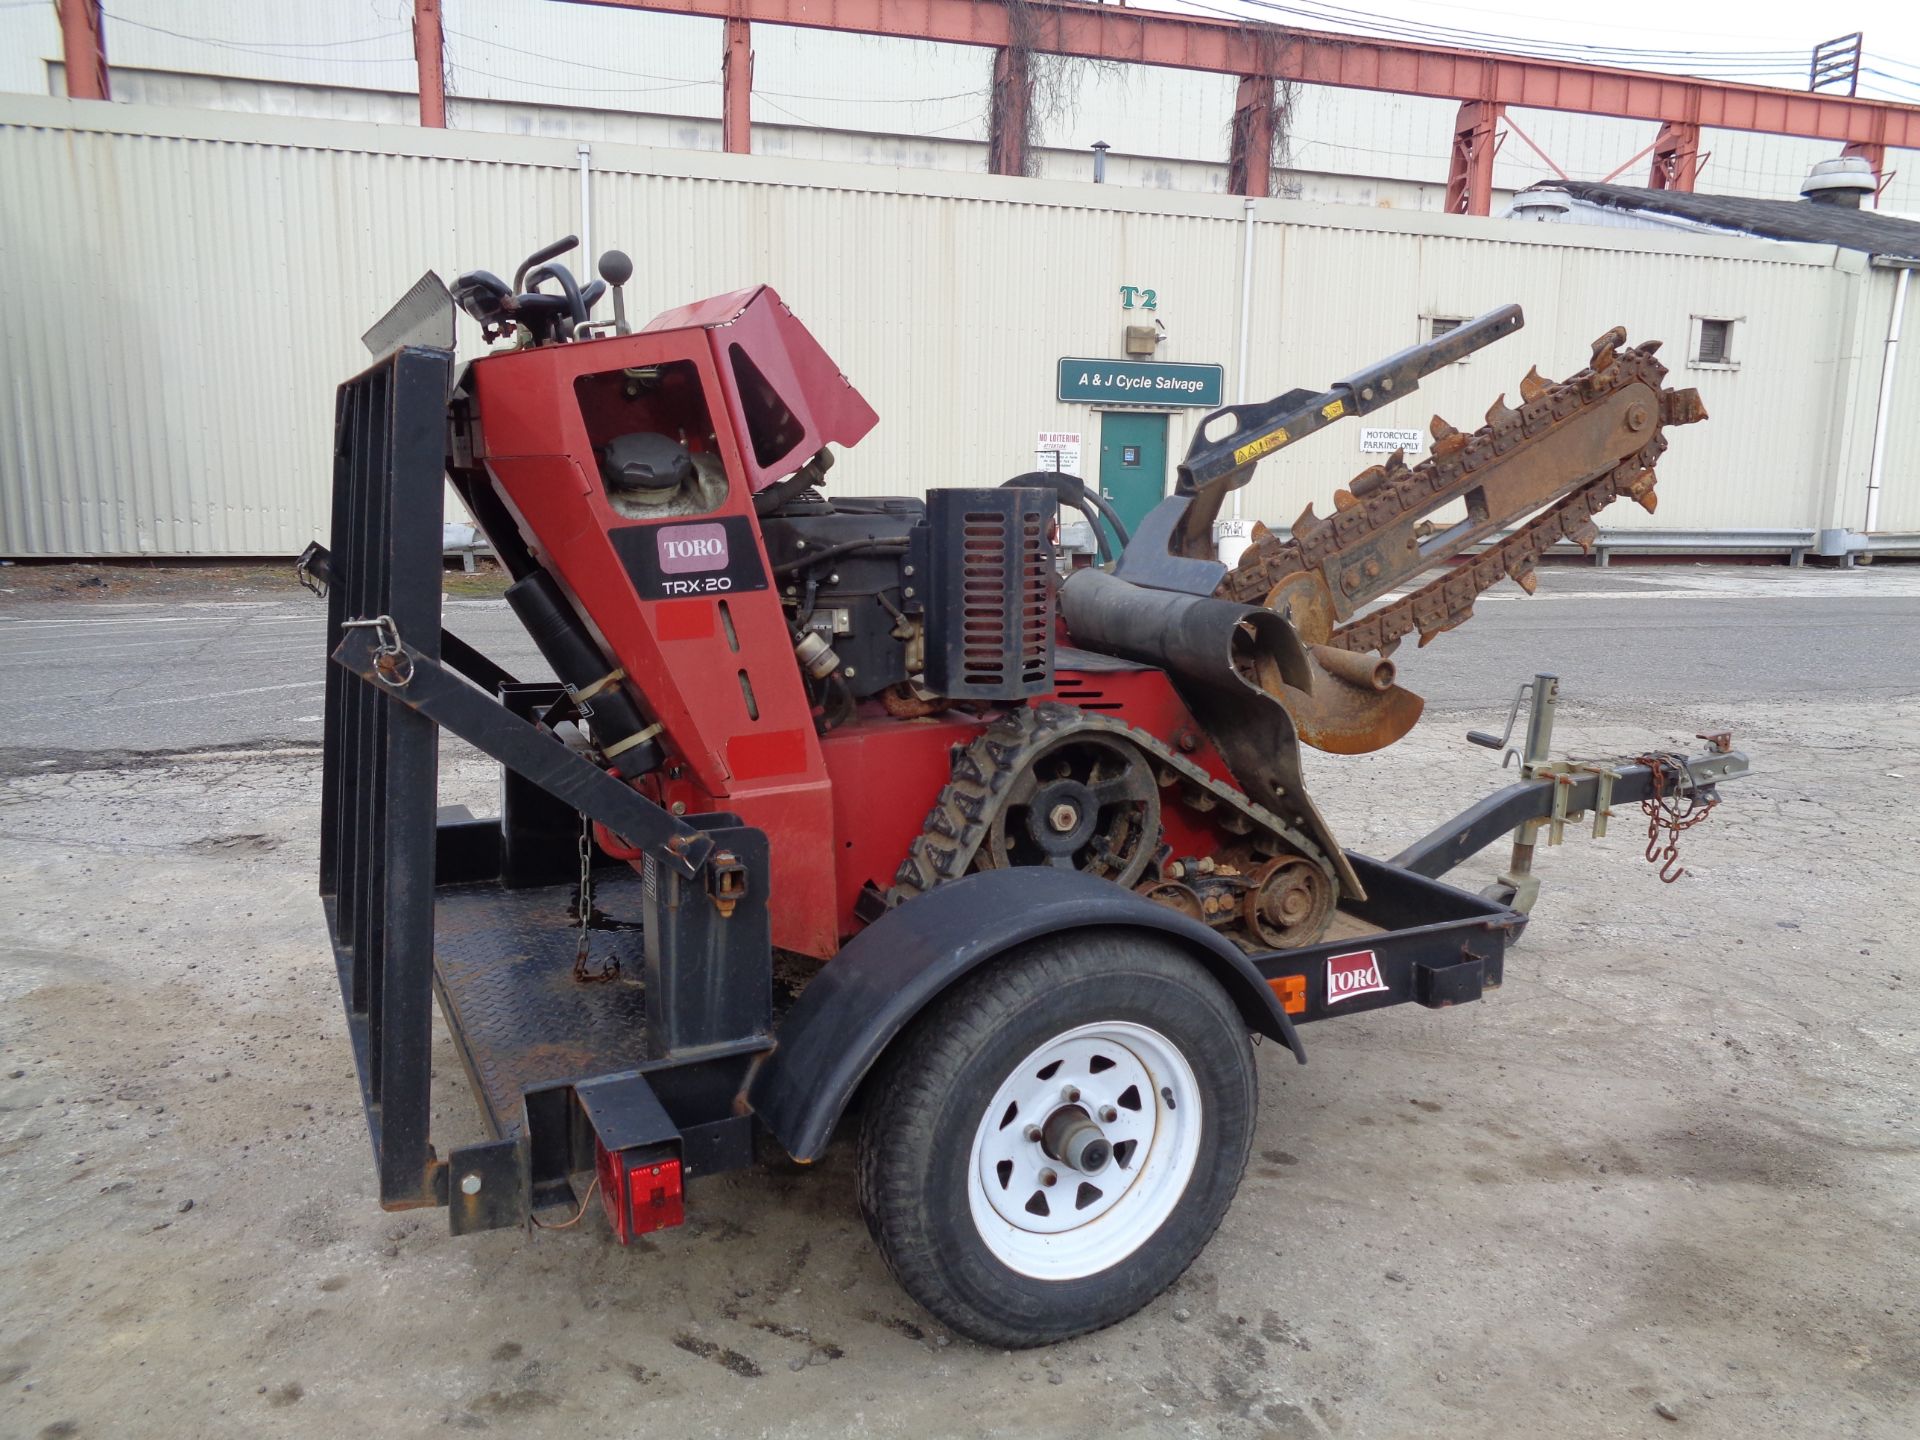 2014 Toro TRX20 Trencher with Trailer - Image 17 of 19